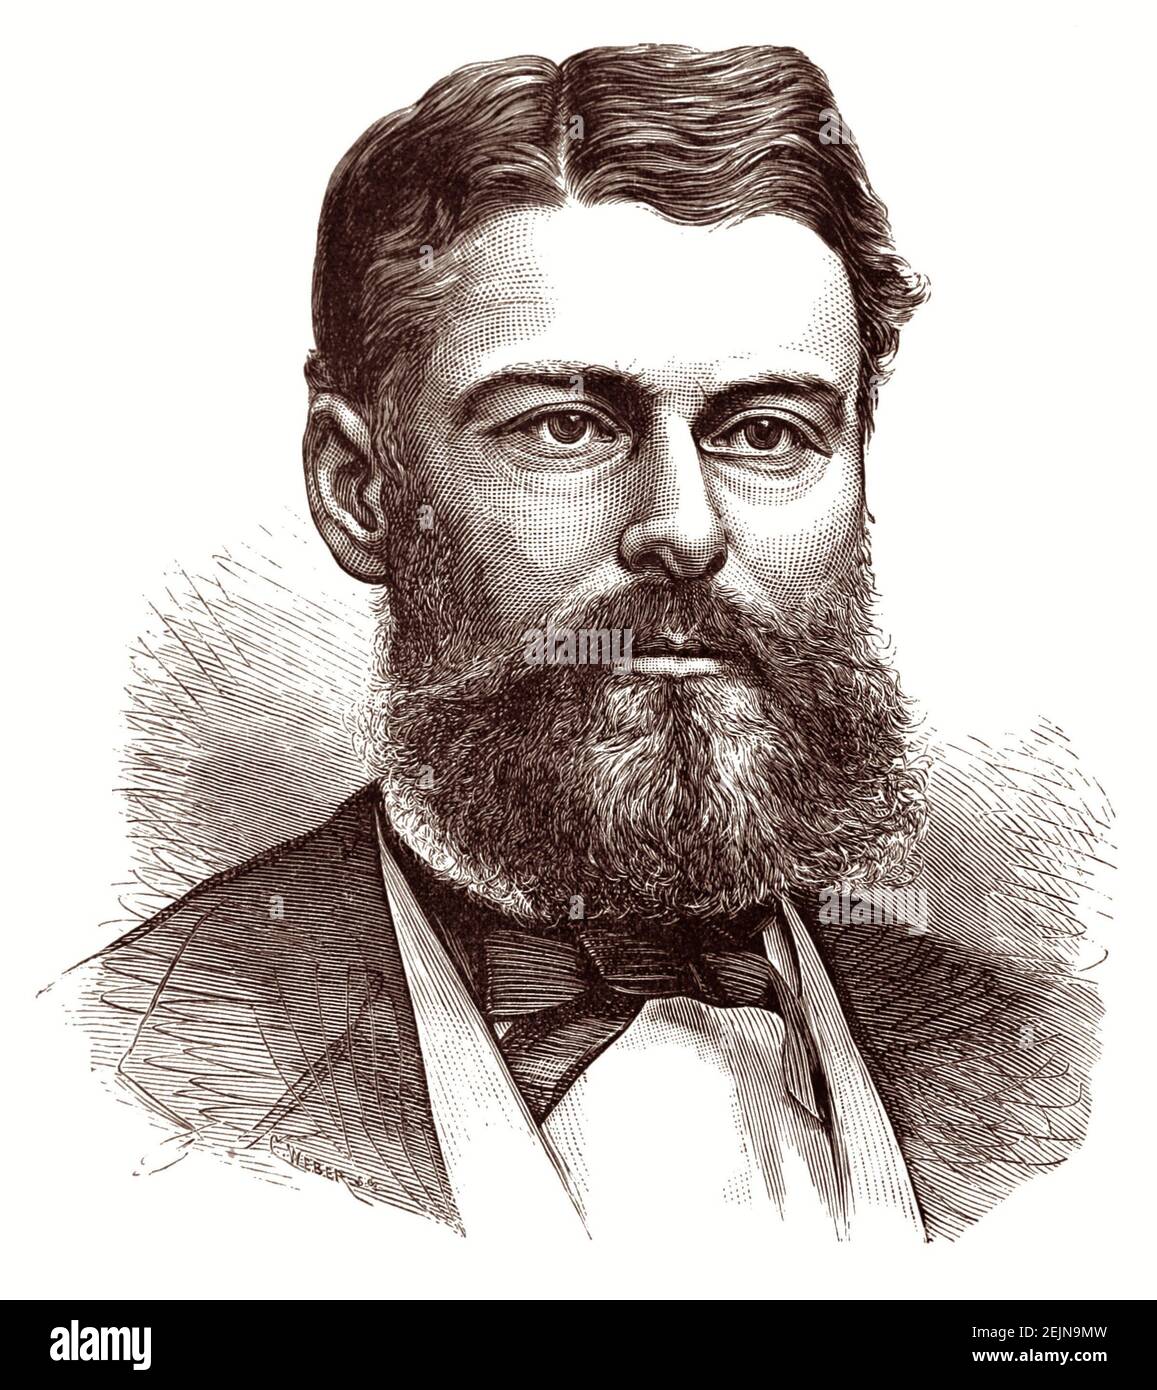 Engraving of Edward Drinker Cope (1840–1897), American paleontologist, zoologist, and herpetologist. Cope is perhaps best remembered for a personal feud with paleontologist Othniel Charles Marsh which led to a period of intense fossil-finding competition now known as the Bone Wars. Stock Photo